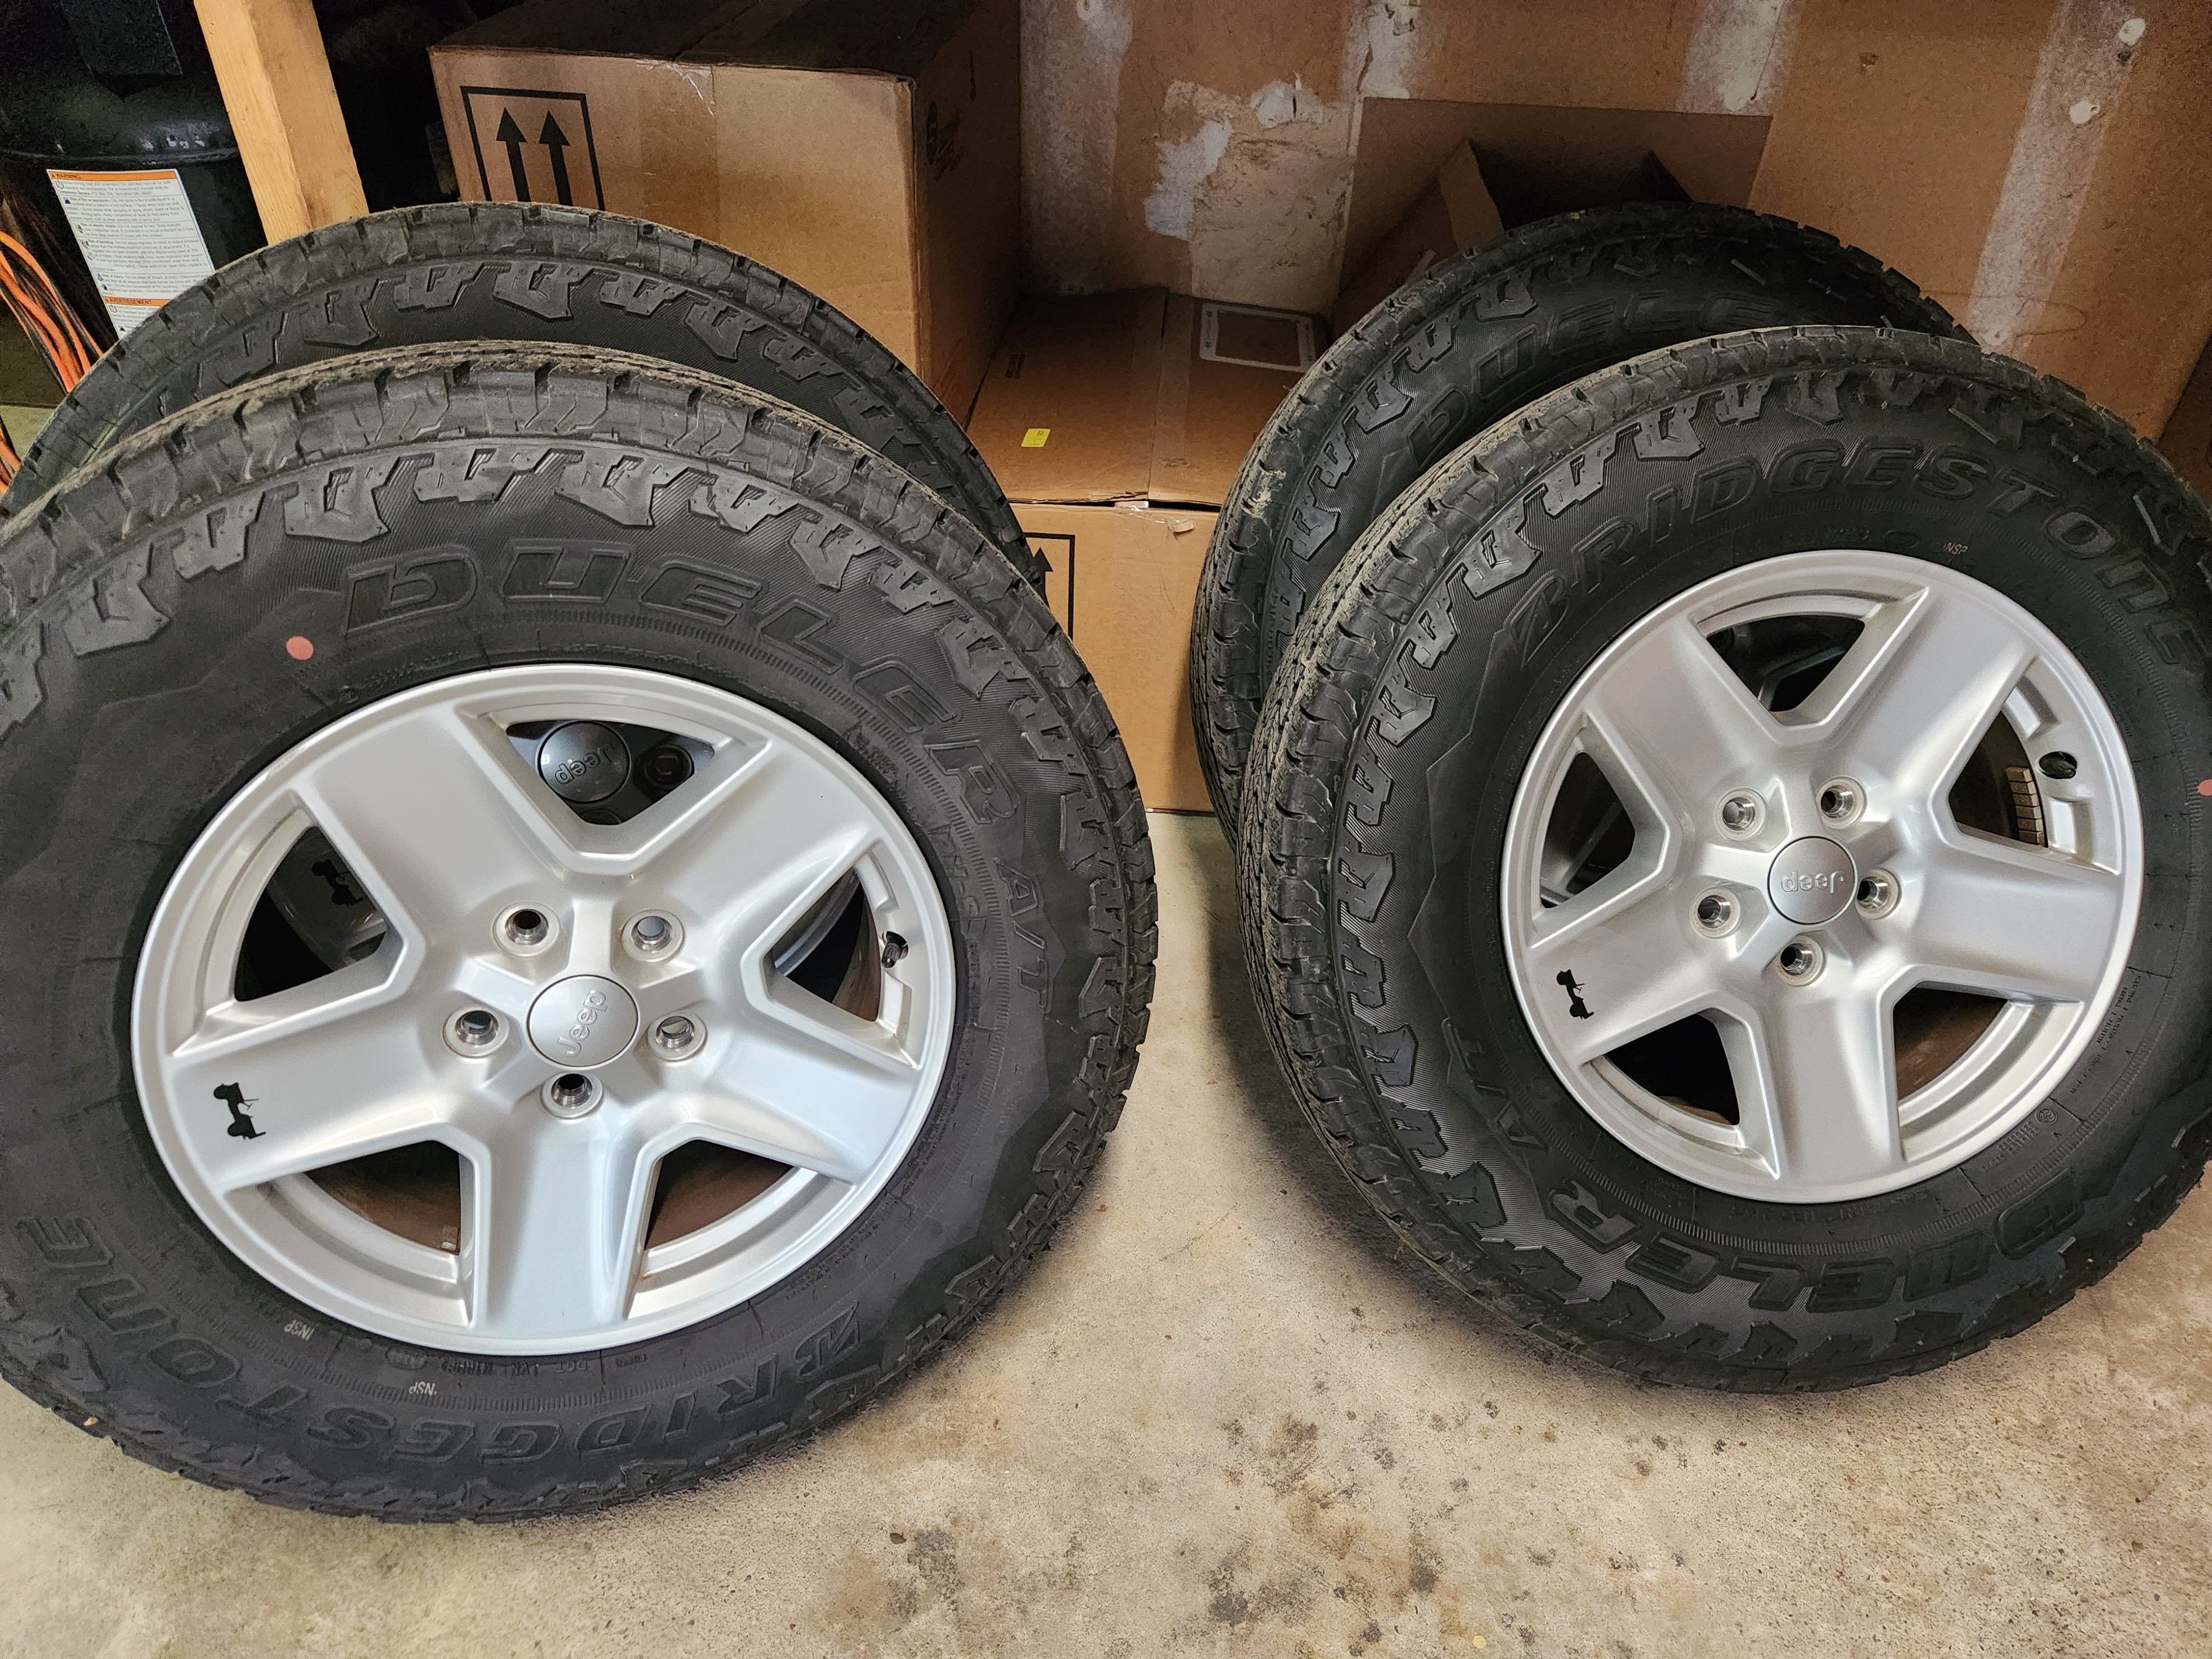 Gladiator wheels and tires with TPMS